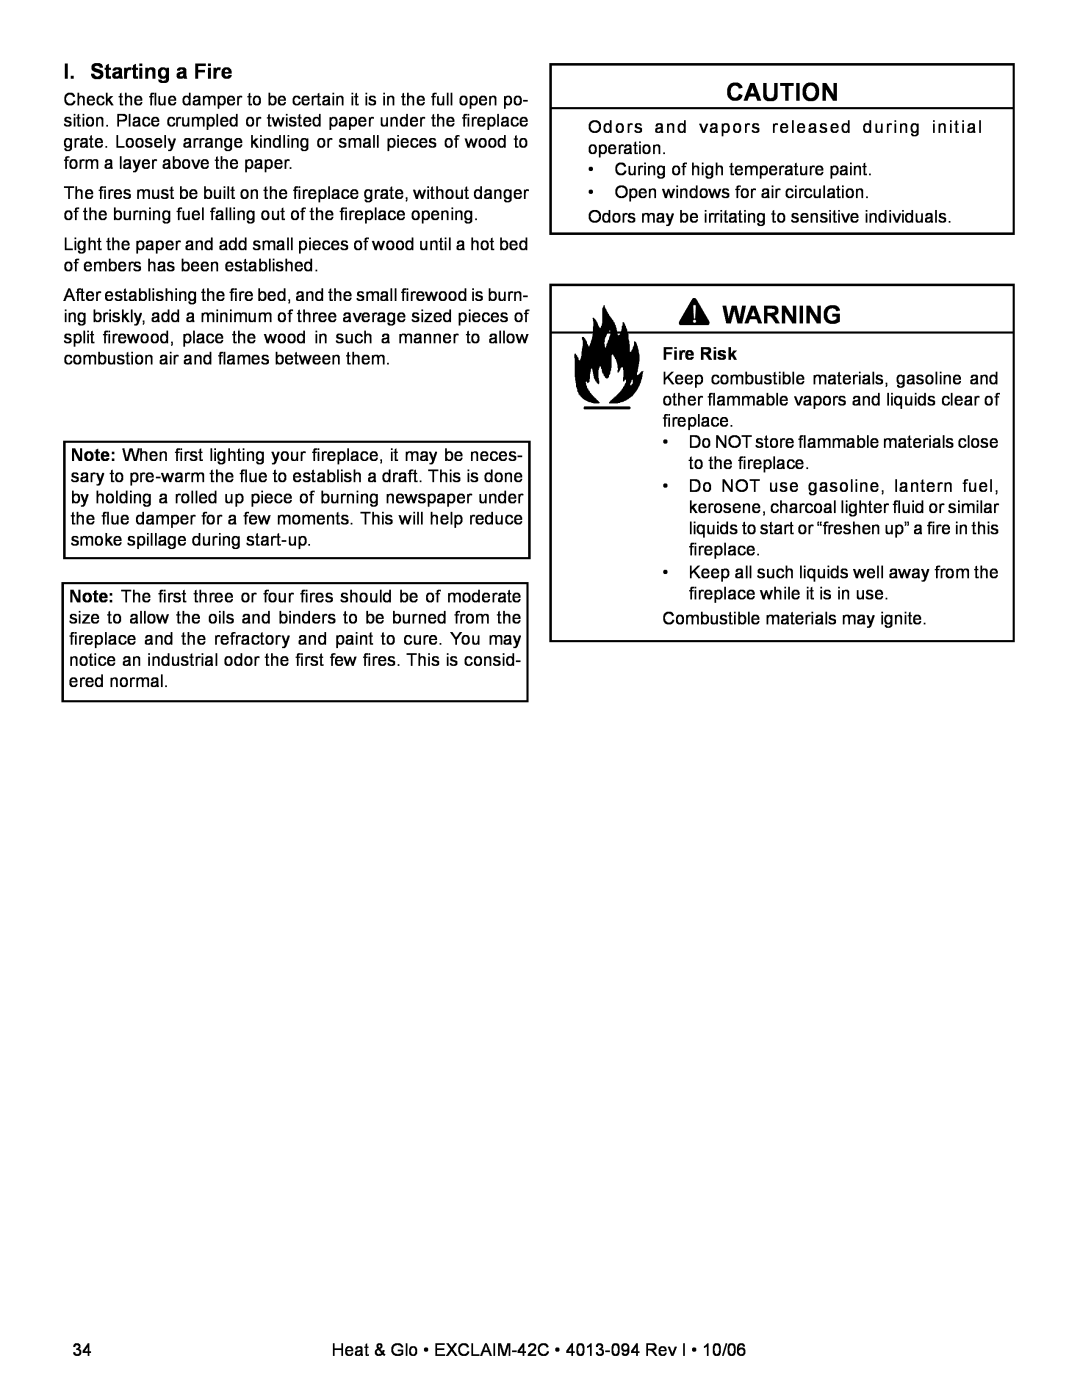 Heat & Glo LifeStyle EXCLAIM-42H-C, EXCLAIM-42T-C owner manual I. Starting a Fire, Fire Risk 